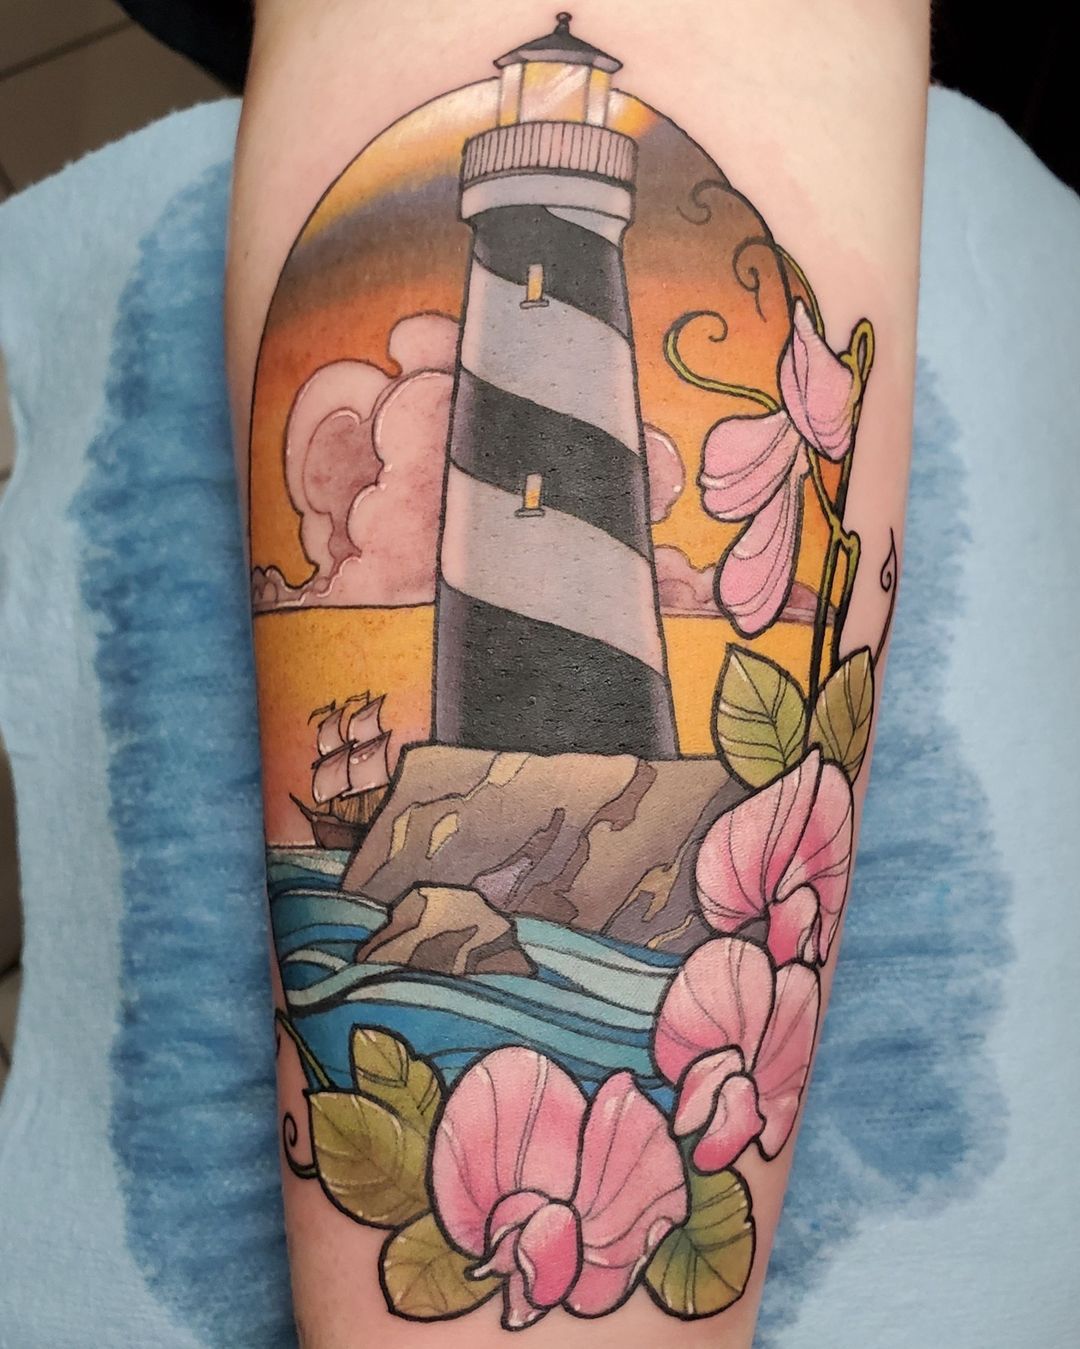 Tattoo uploaded by Ivory  mydreamtattoo dreamtattoo amijames memorial  mawmaw lighthouse  Tattoodo